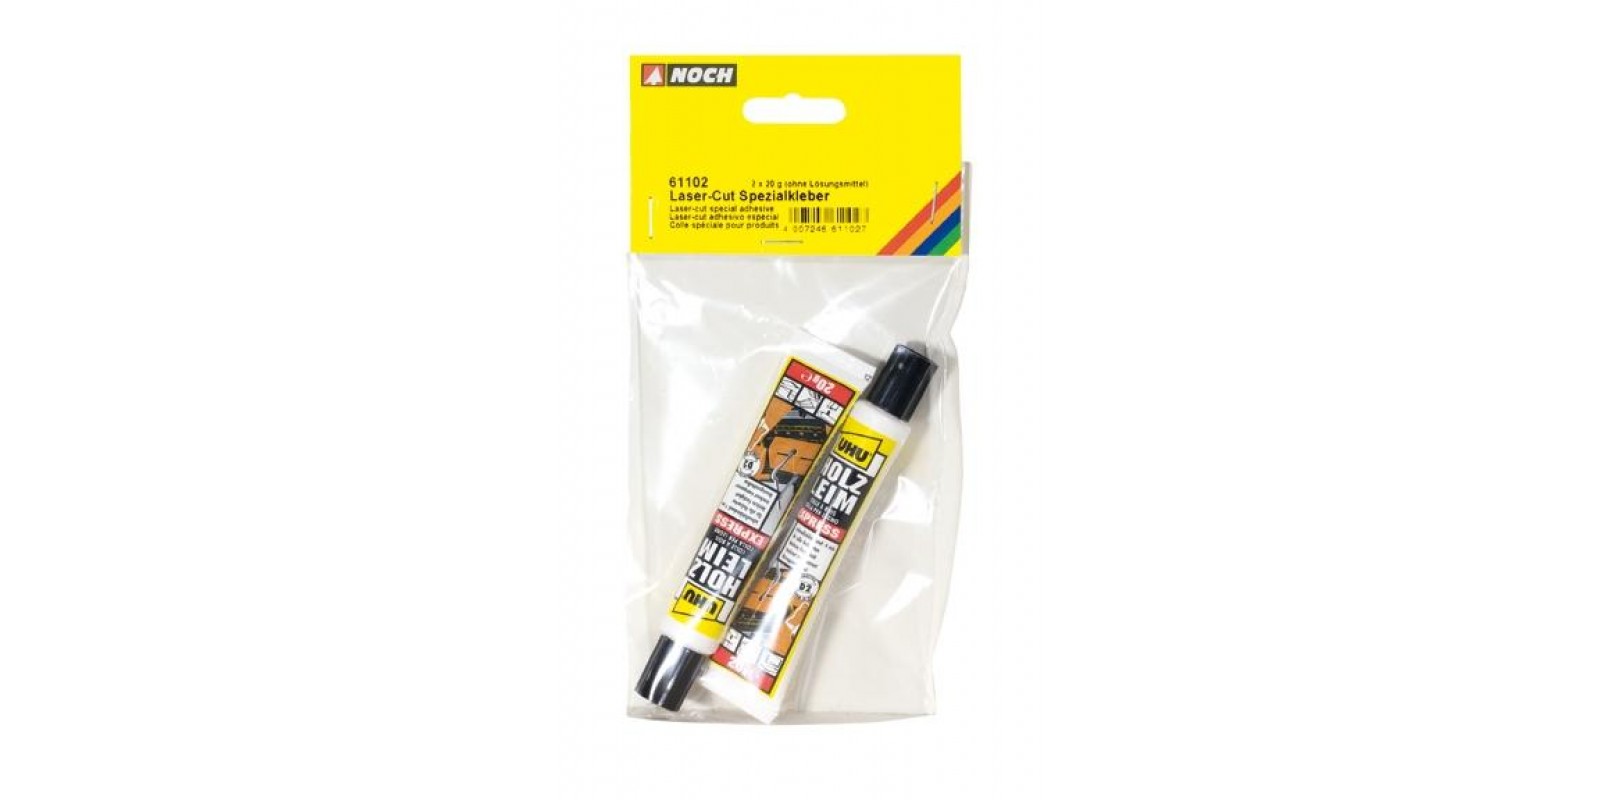 No61102 Laser-cut special adhesive, for laser cut kits 